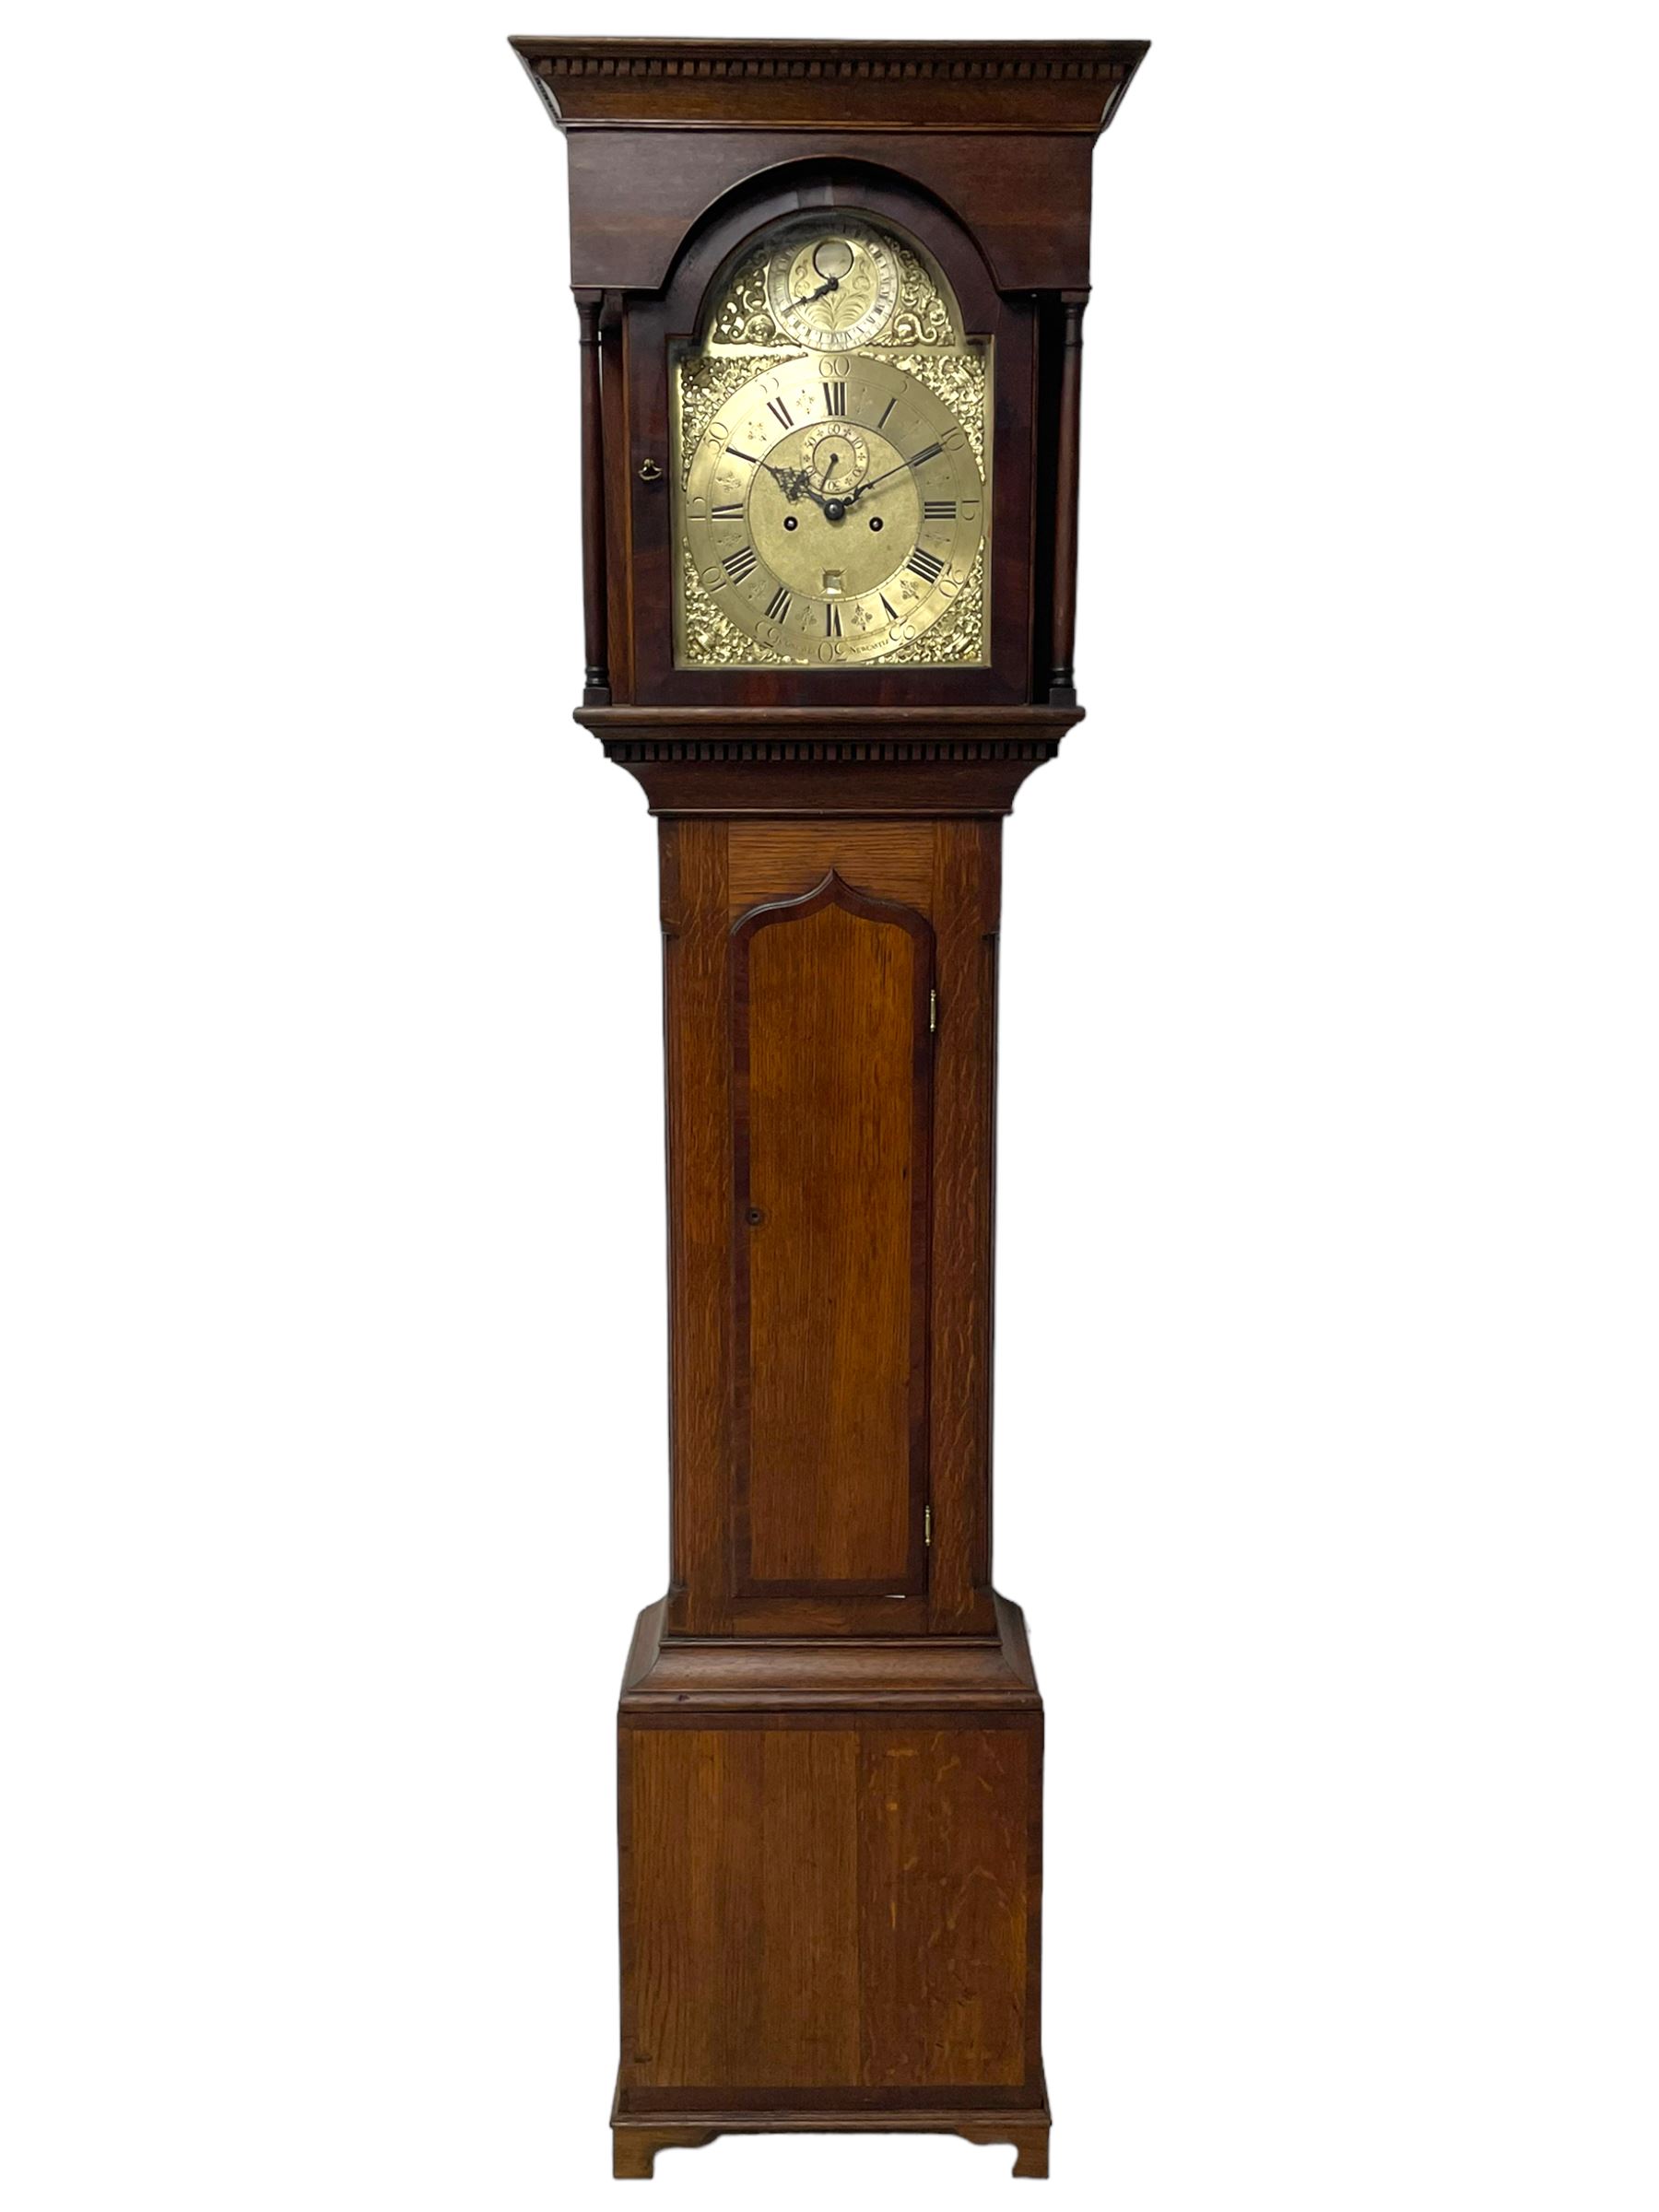 John Greaves of Newcastle - Mid-18th century 8-day oak longcase clock with a flat top